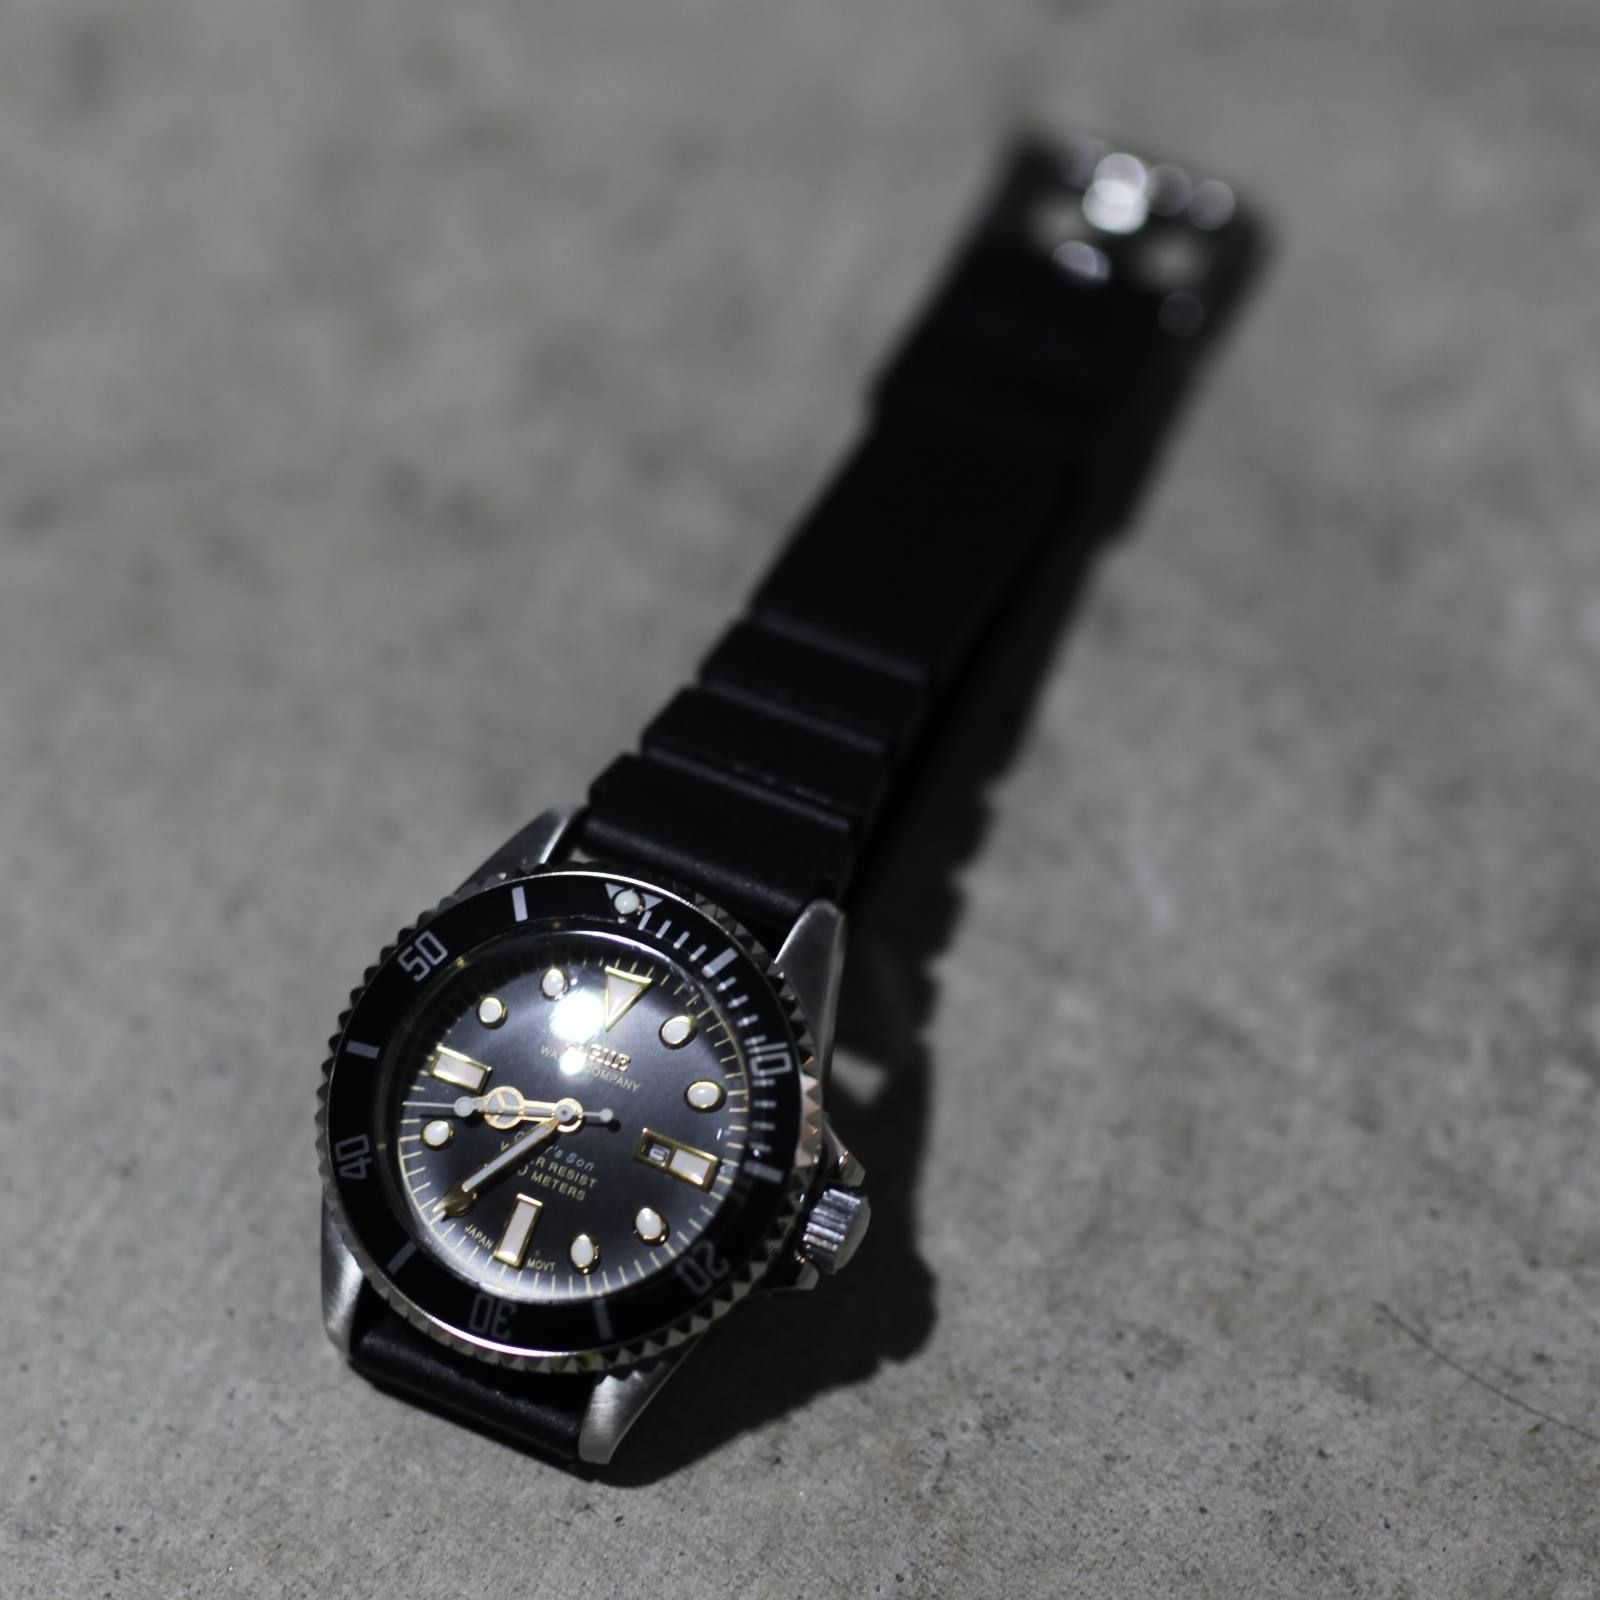 VAGUE WATCH CO. - 【お取り寄せ注文可能】Diver's Son | ACRMTSM ...